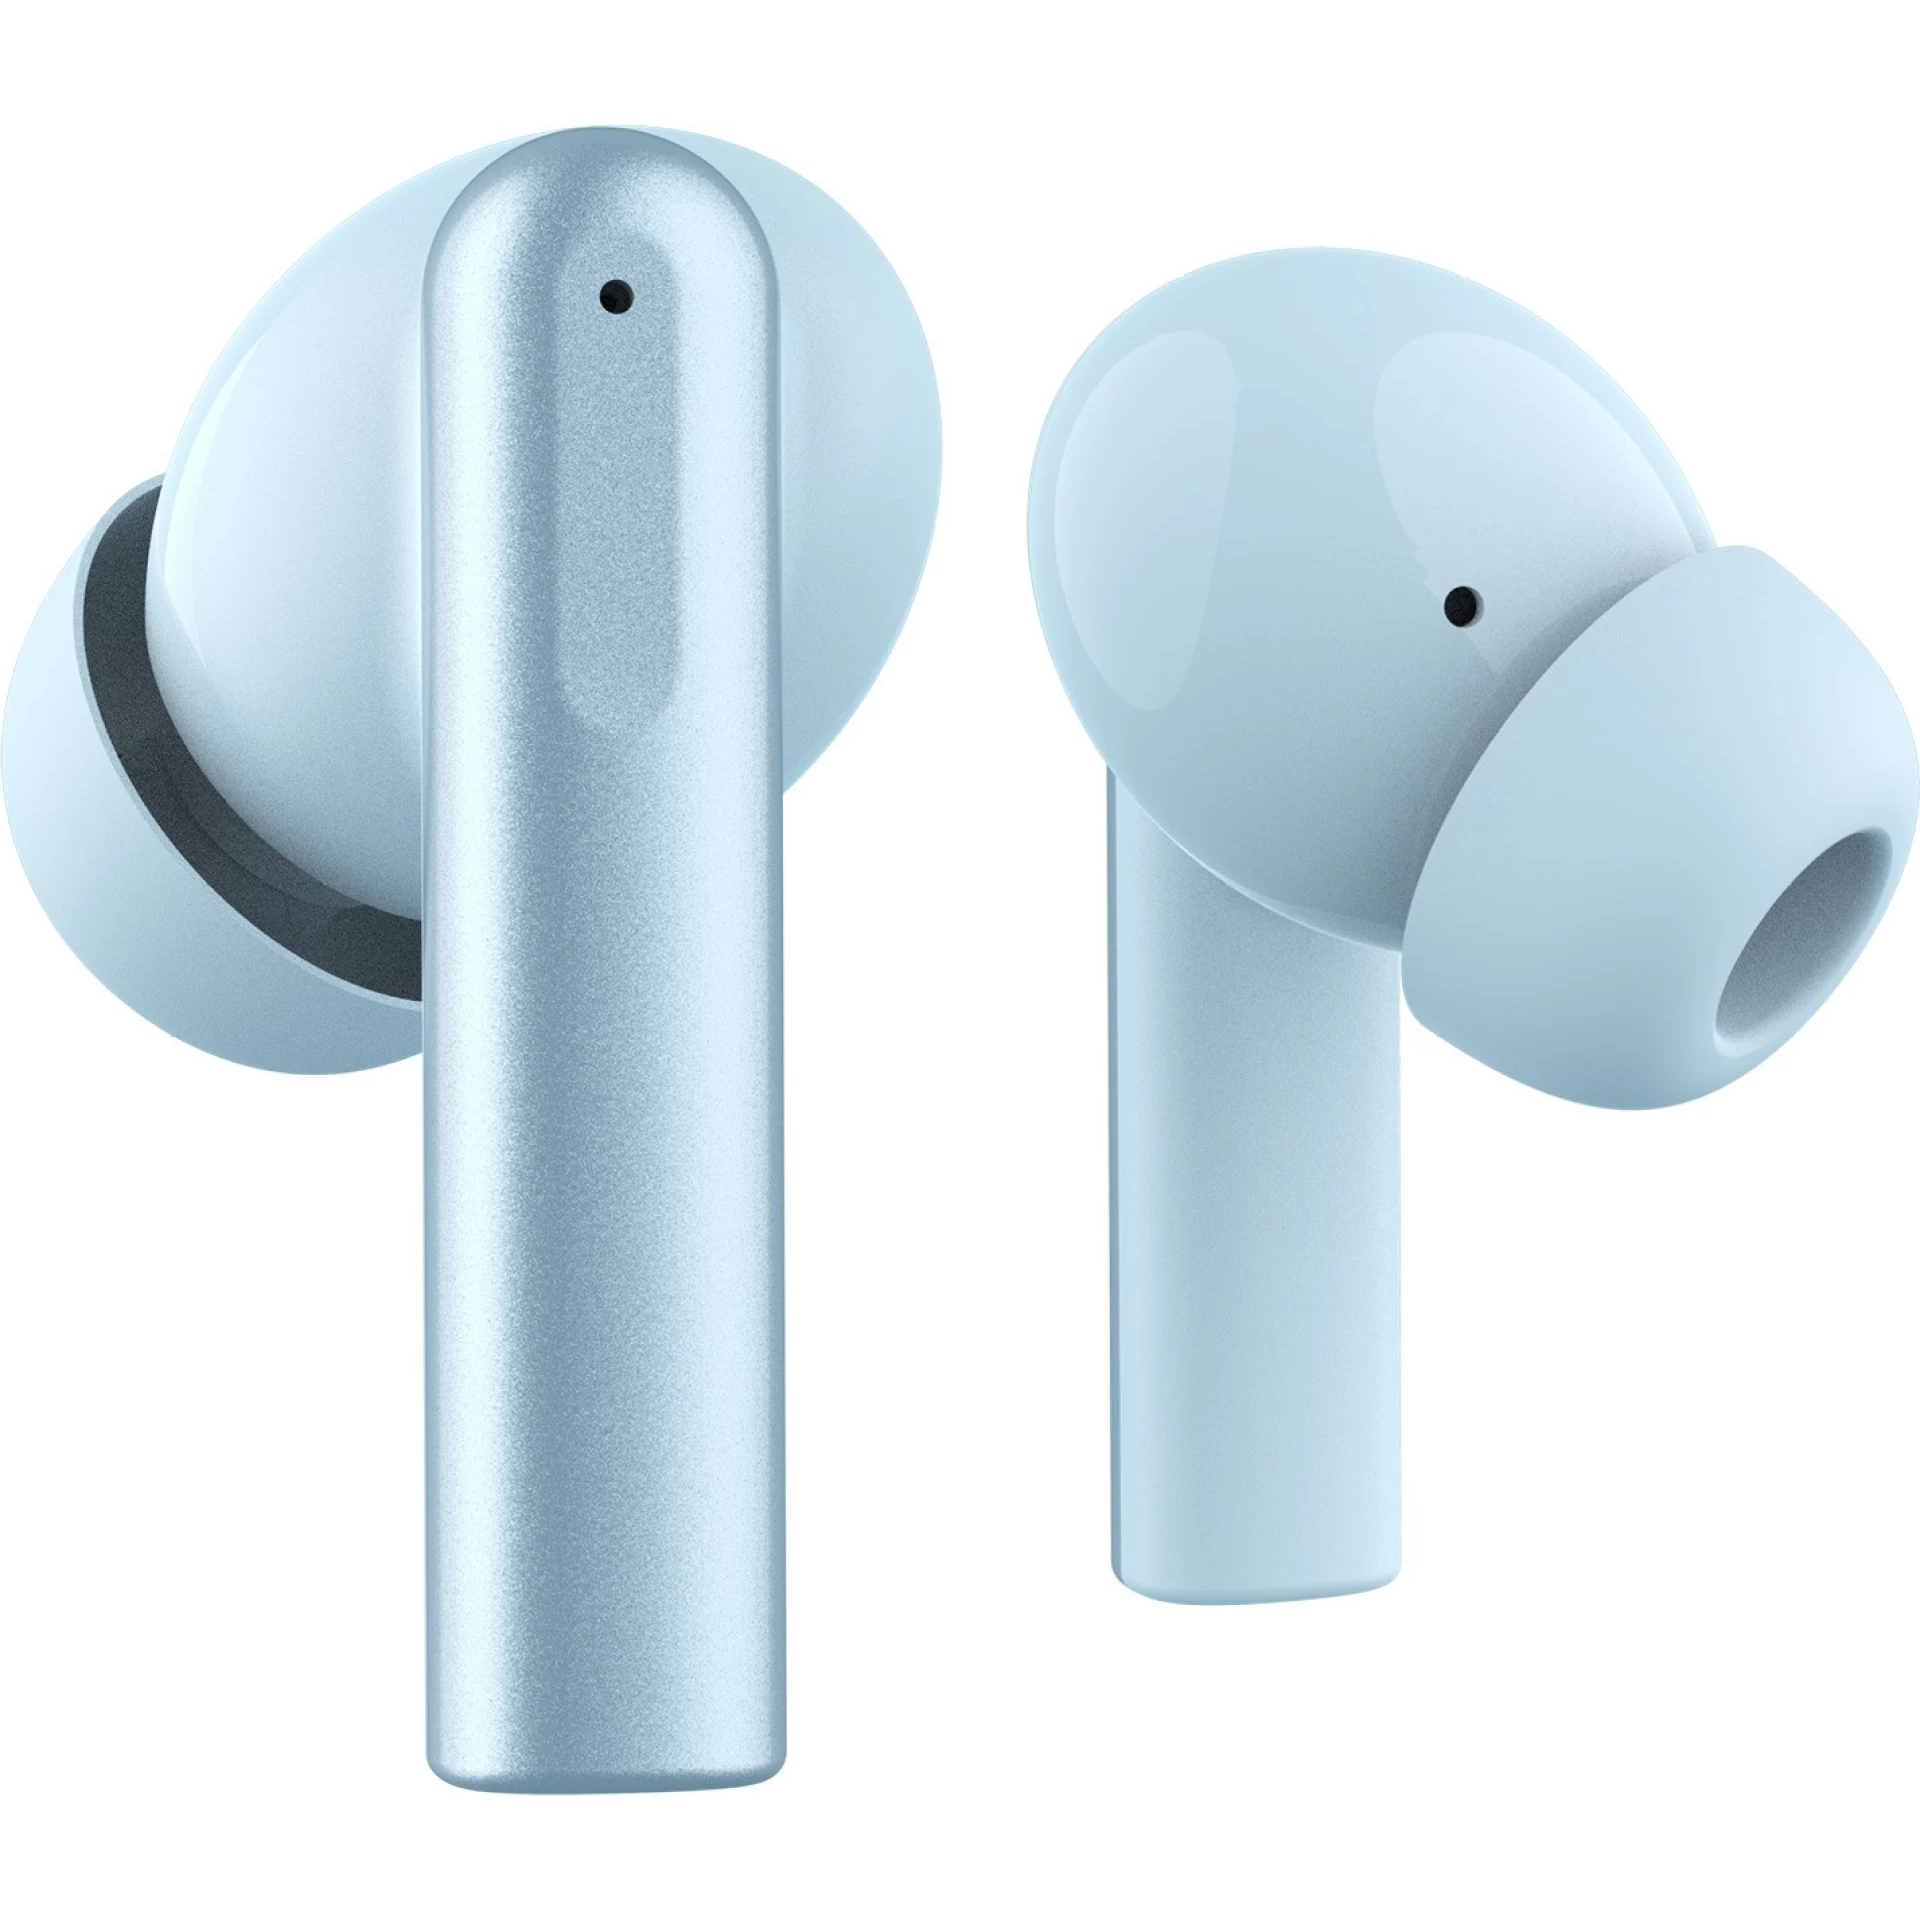 Affordable earbuds